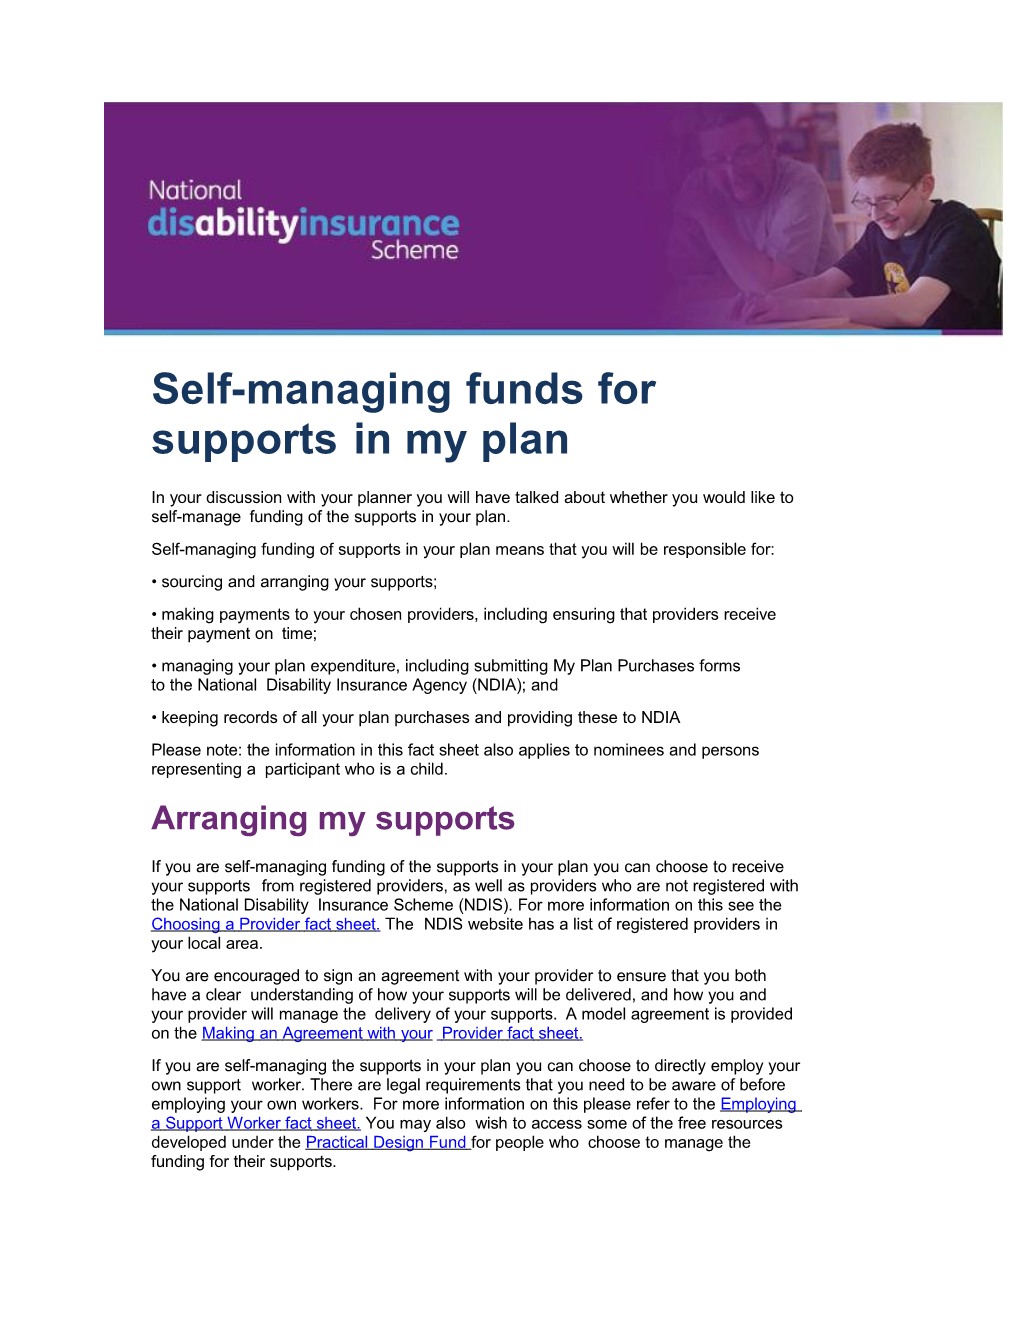 Self-Managing Funds for Supports in My Plan